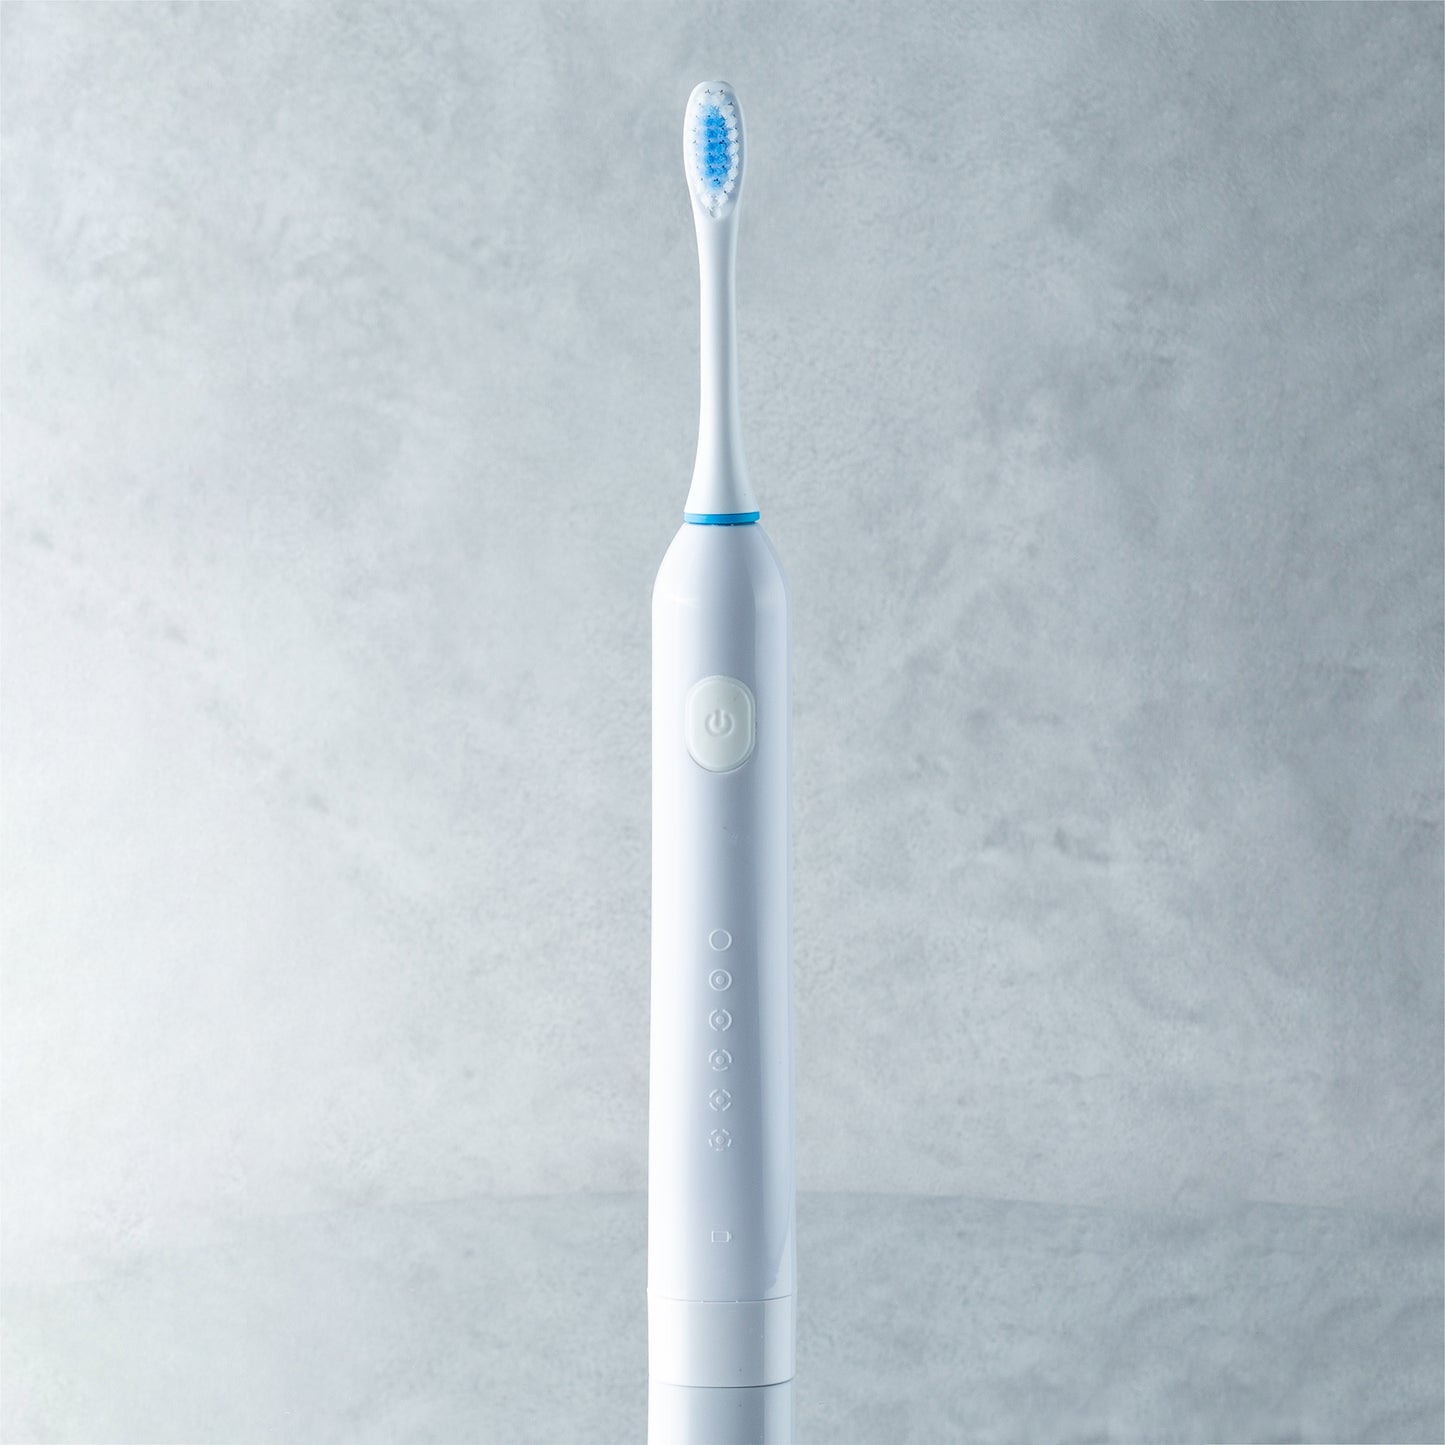 GALLEIDO DENTAL CLUB ELECTRIC TOOTHBRUSH SUBSCRIPTION